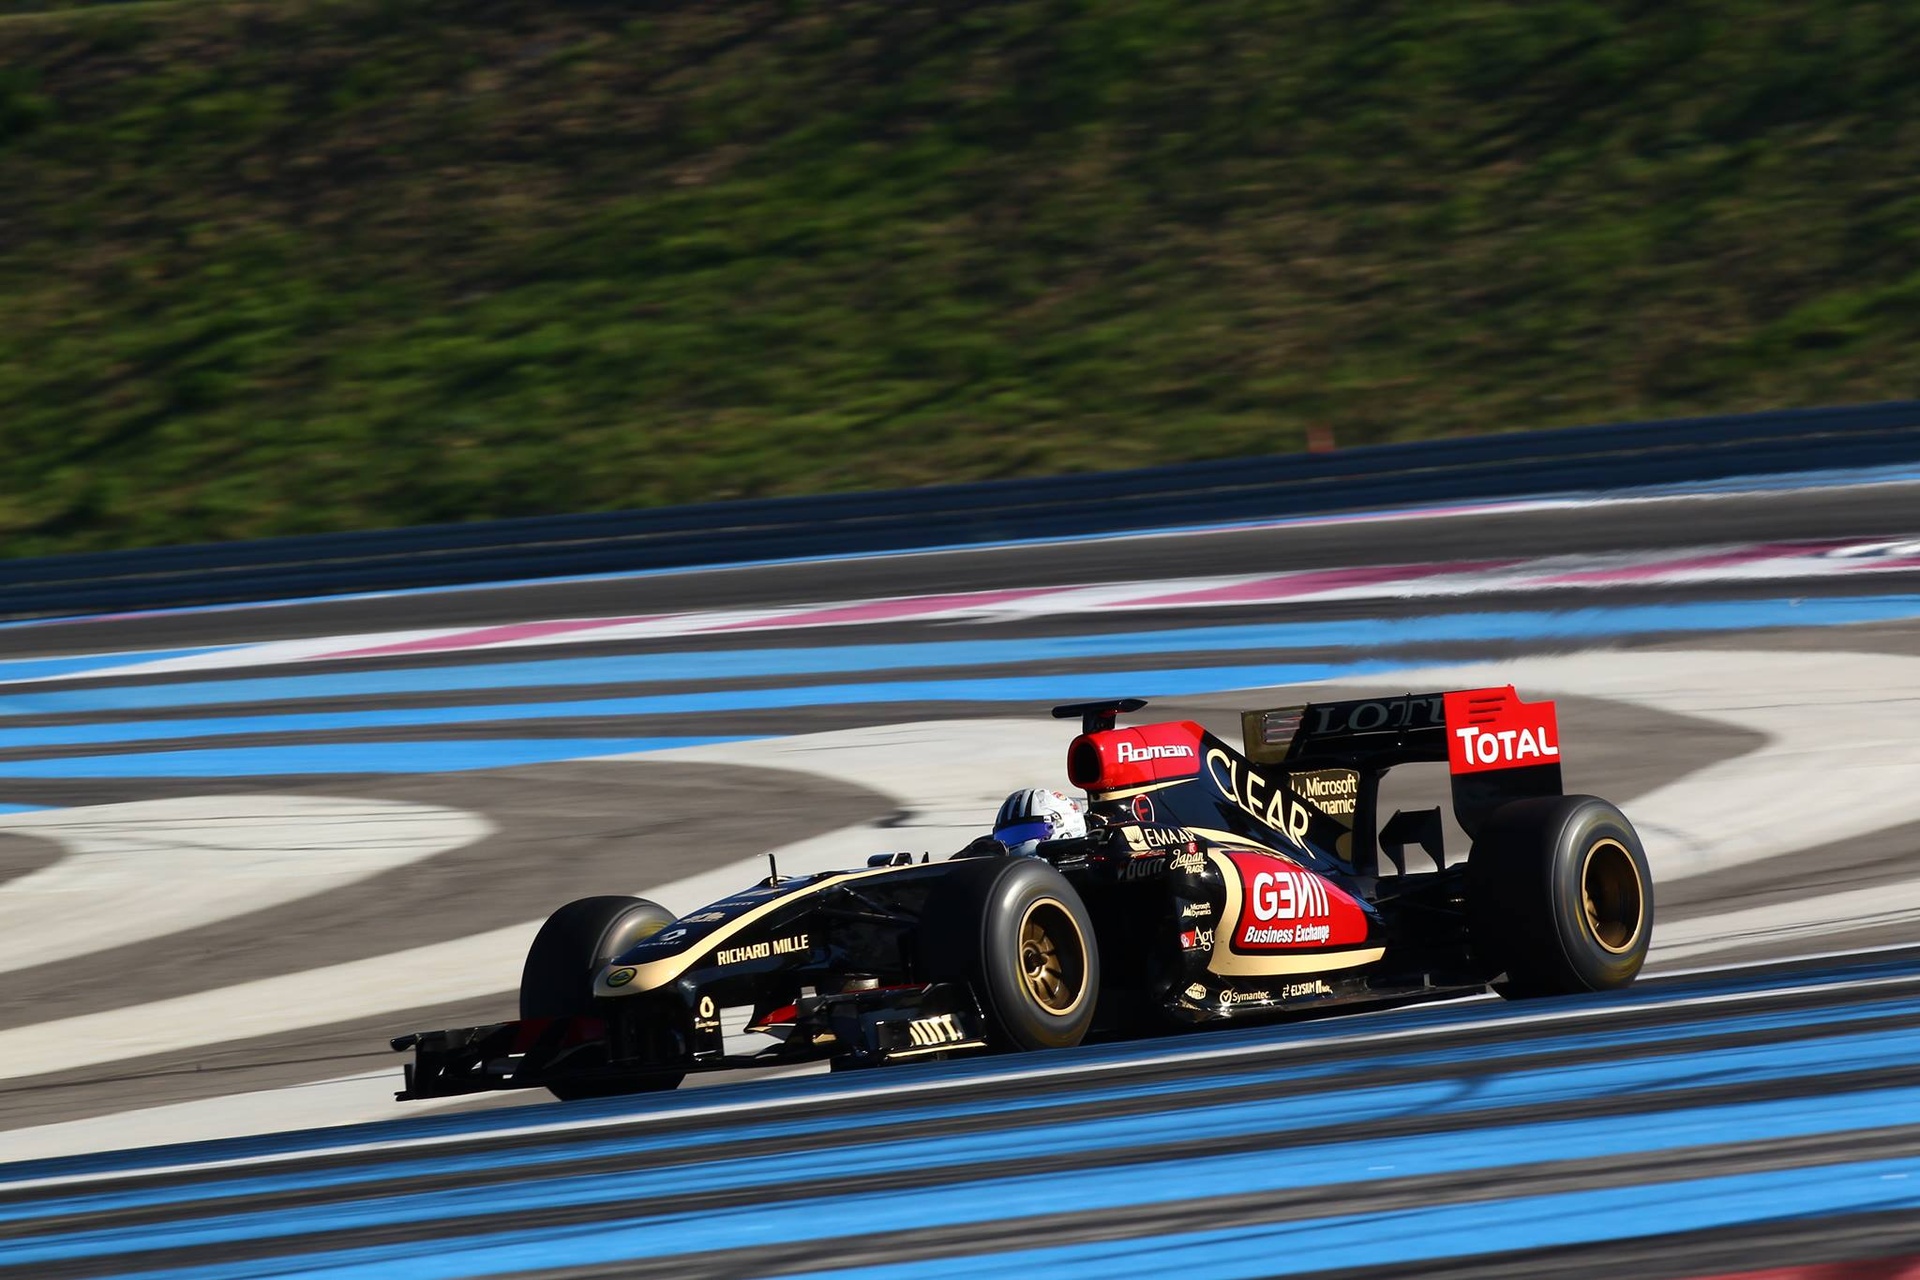 Alex Fontana: on 30 September 2013, the driver from Ticino carried out a test with the Formula 1 Lotus-Renault on the French circuit of Paul Ricard